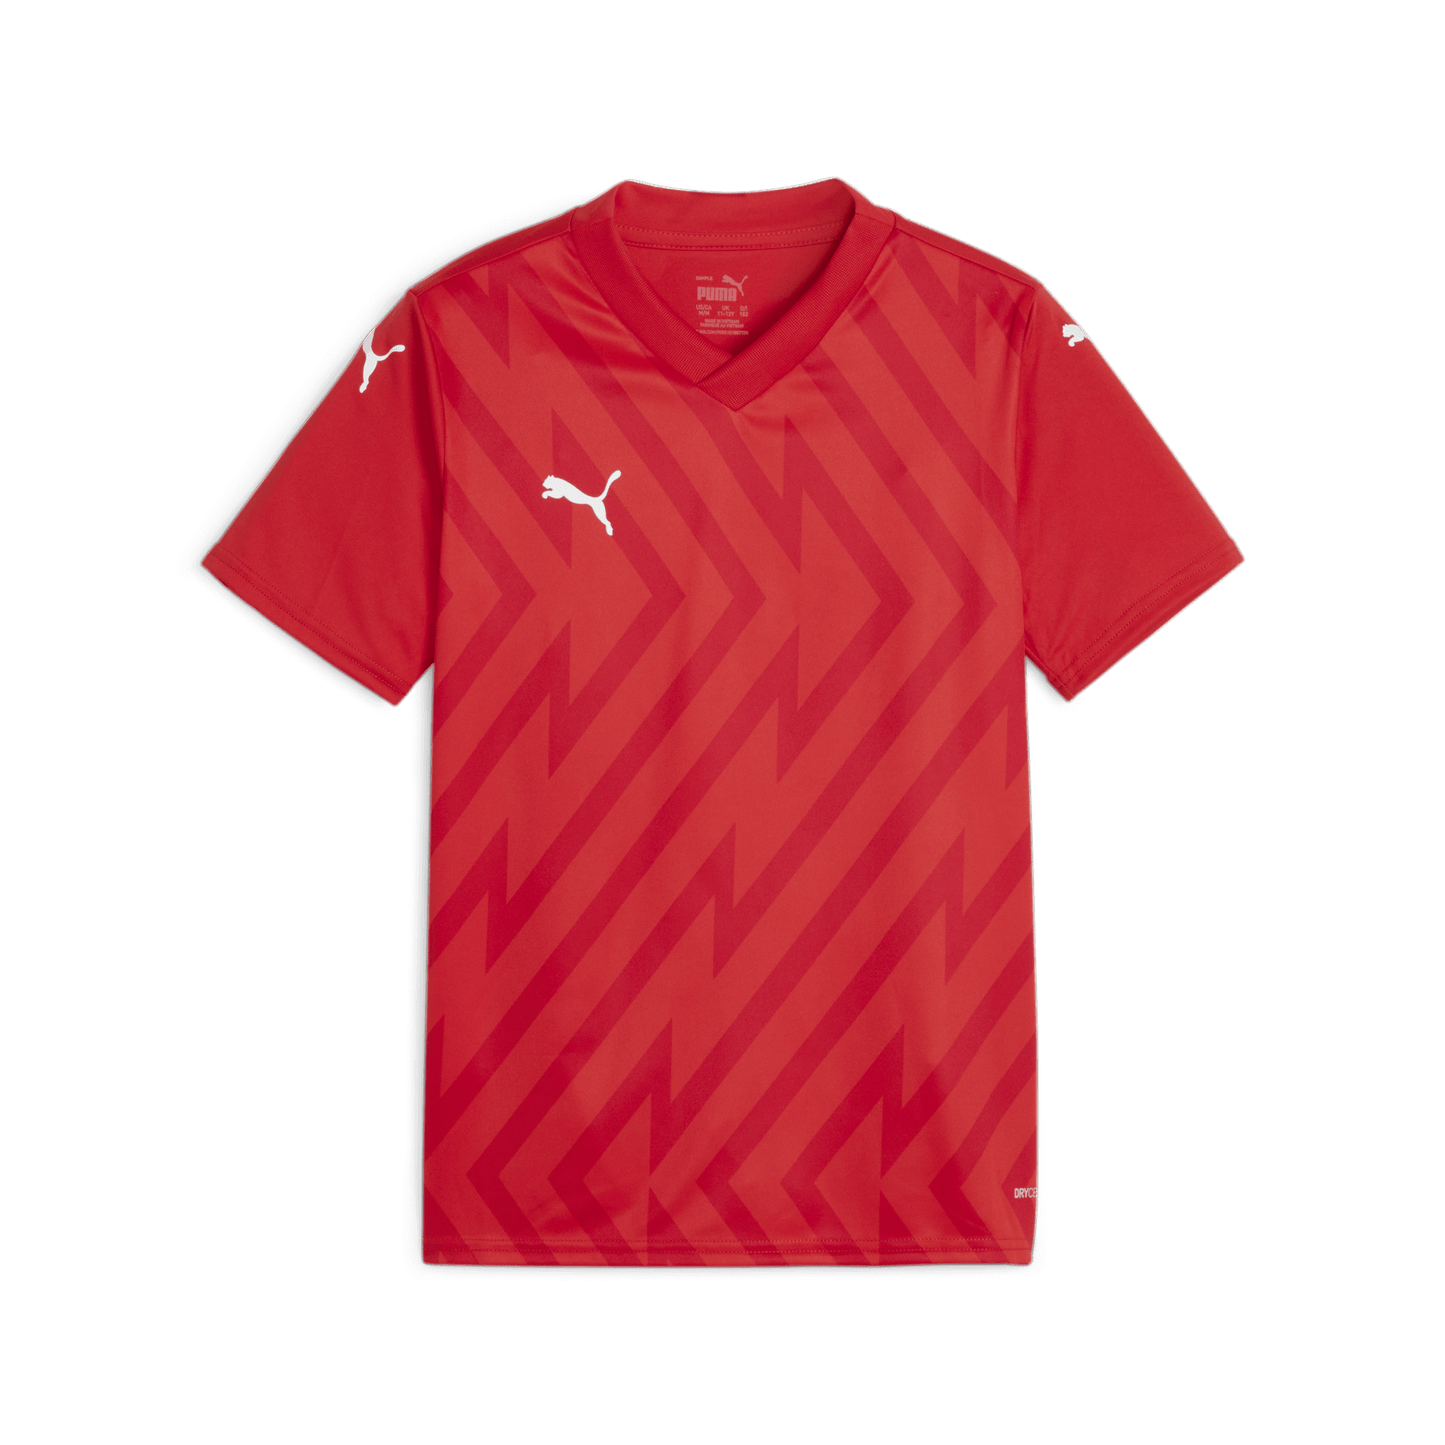 Puma YOUTH Team Glory 26 Jersey- Puma Red-Puma White-Strong Red (Front)